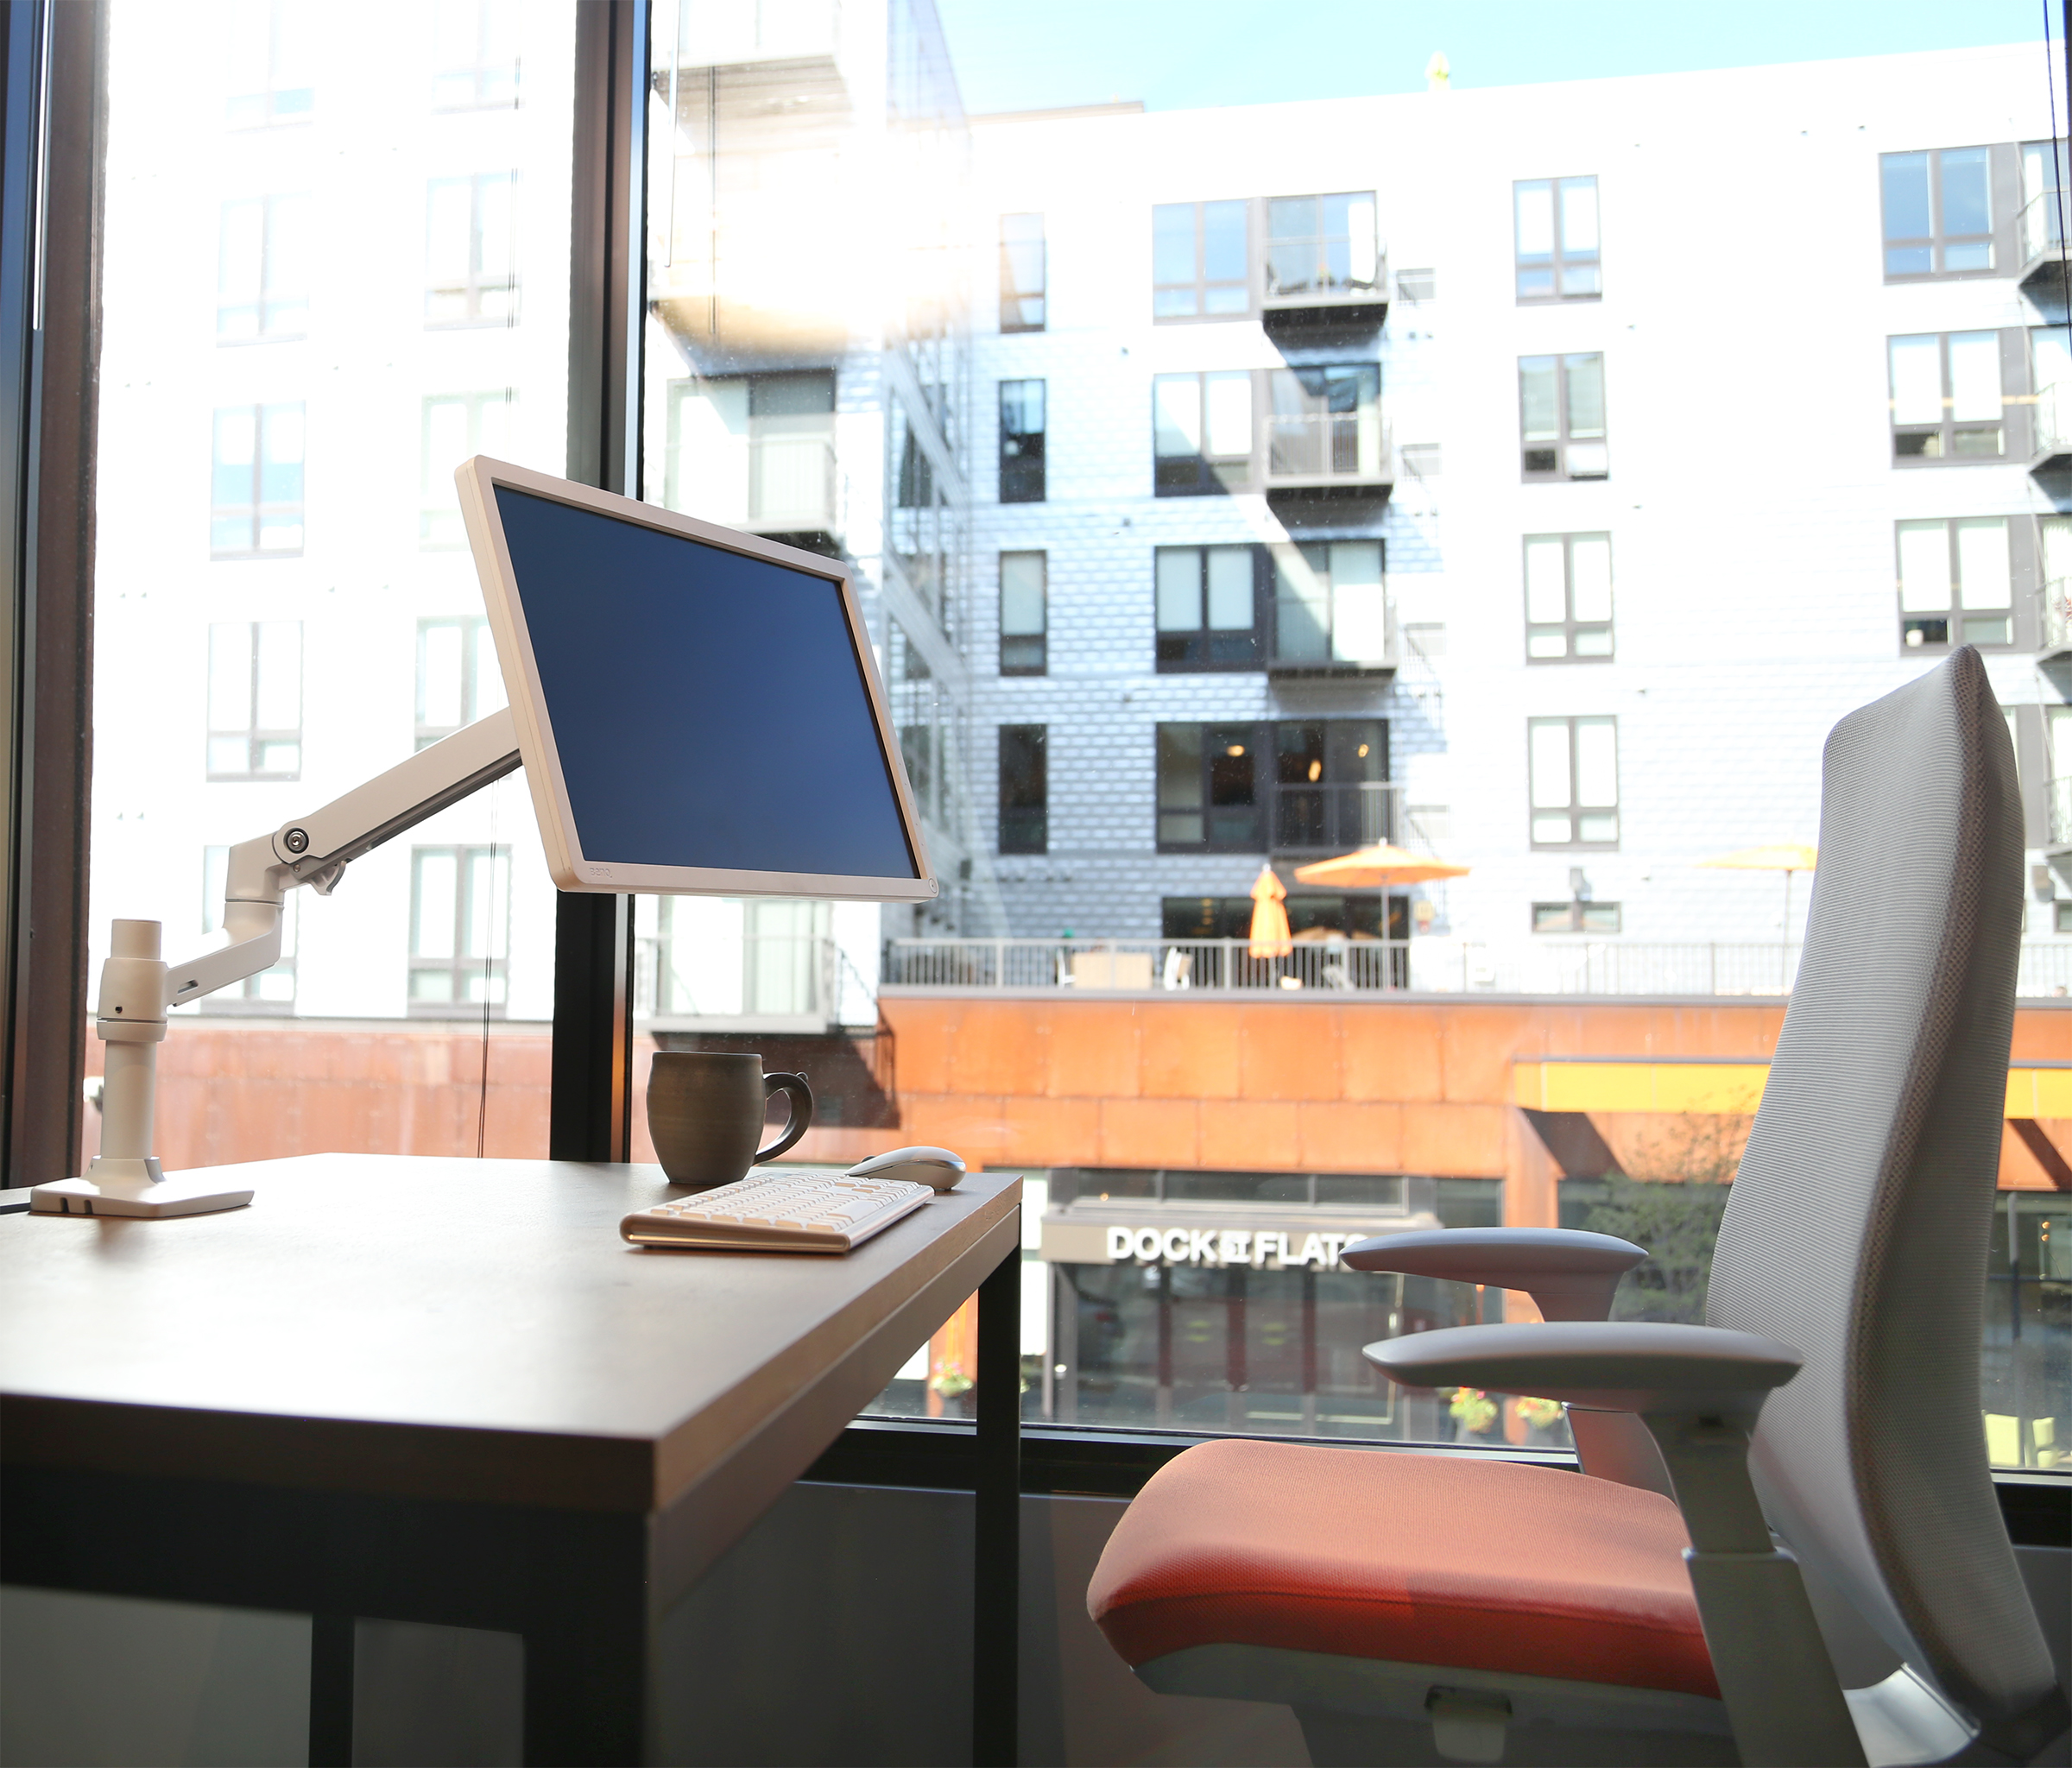 Haworth Monitor Arm Accessories at a desk with fern chair overlooking a city street